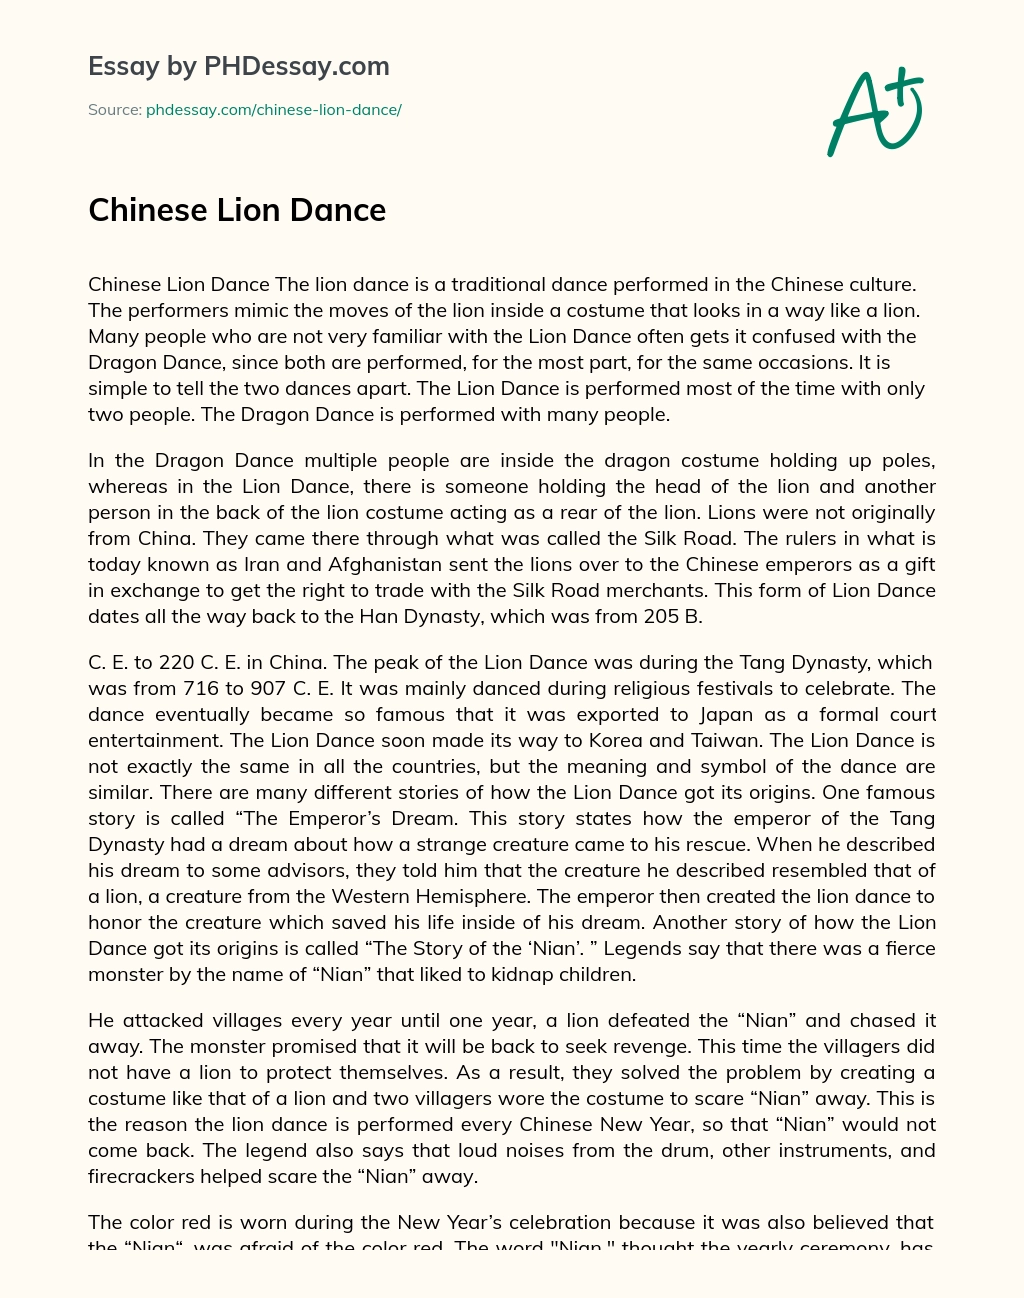 Chinese Lion Dance essay